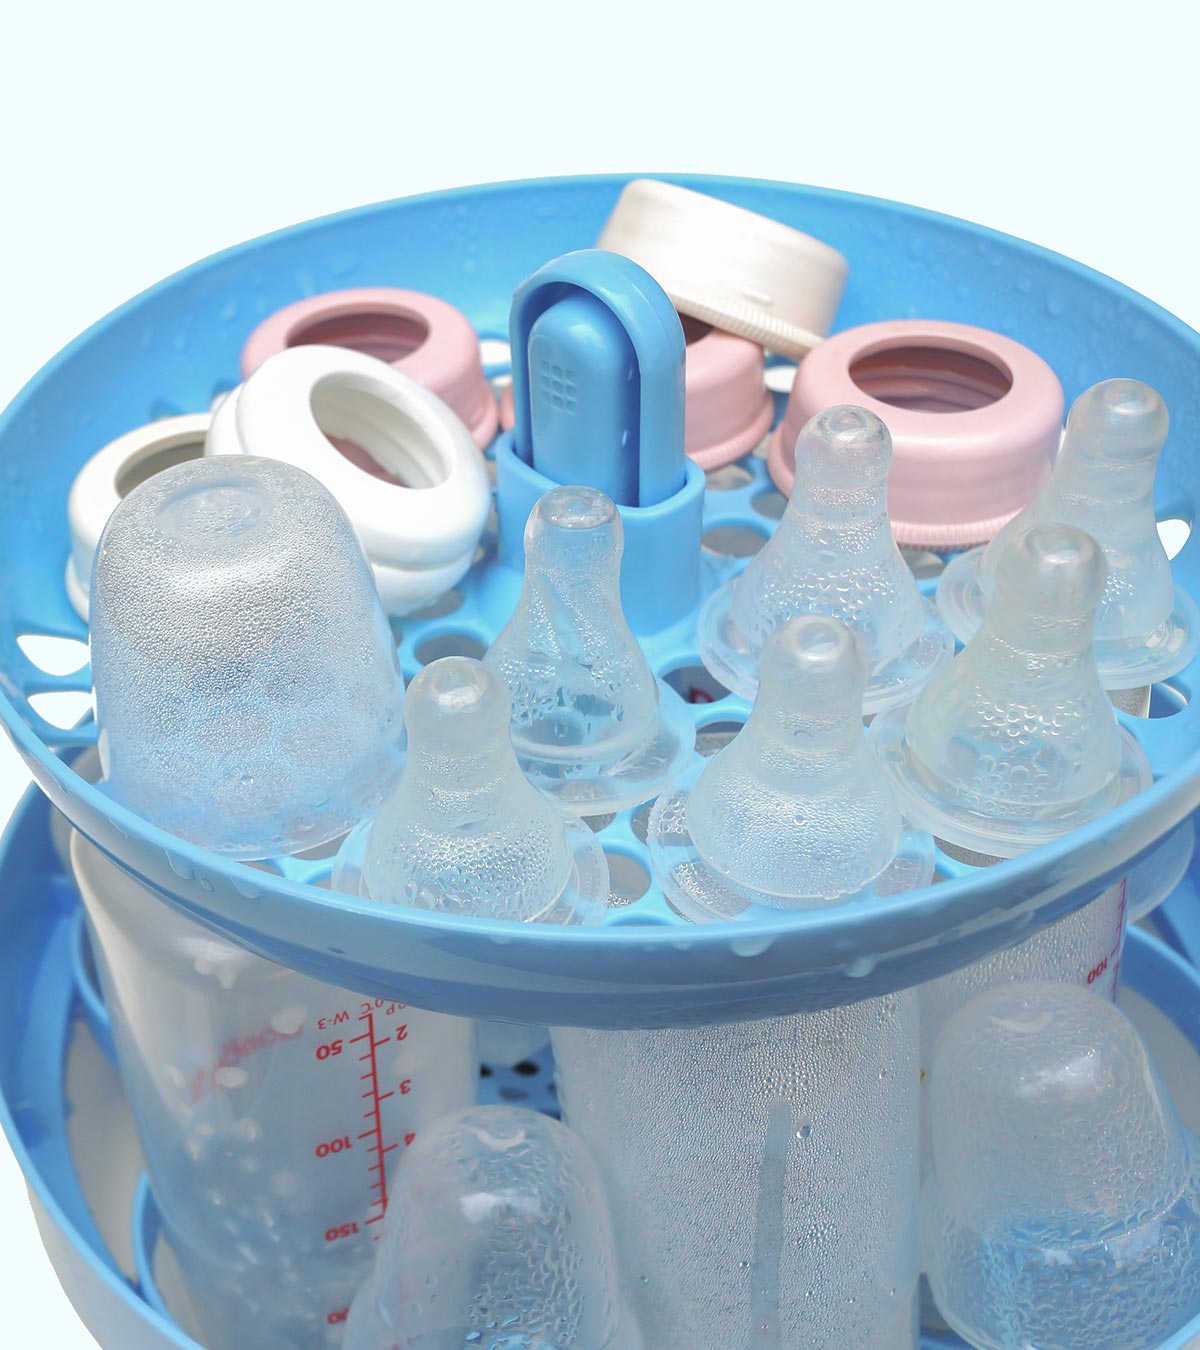 How To Sterilize Baby Bottles: Everything You Need To Know